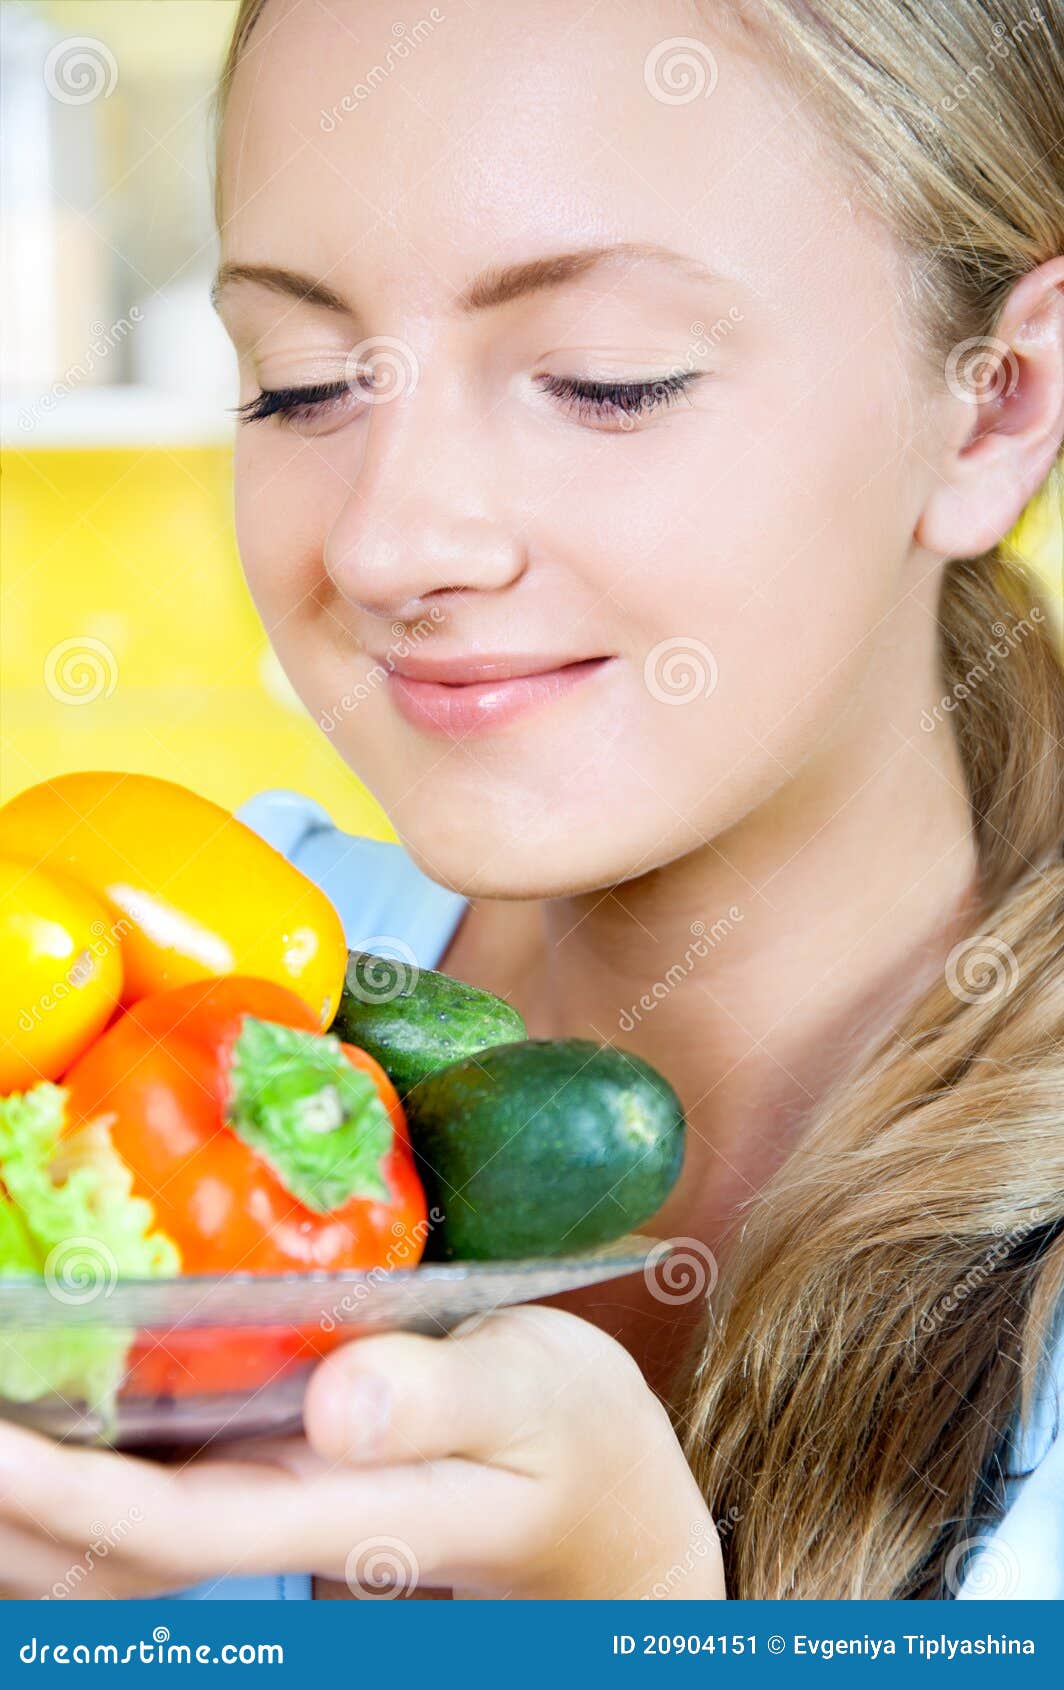 Girl with vegetables stock image. Image of cookery, happy - 20904151